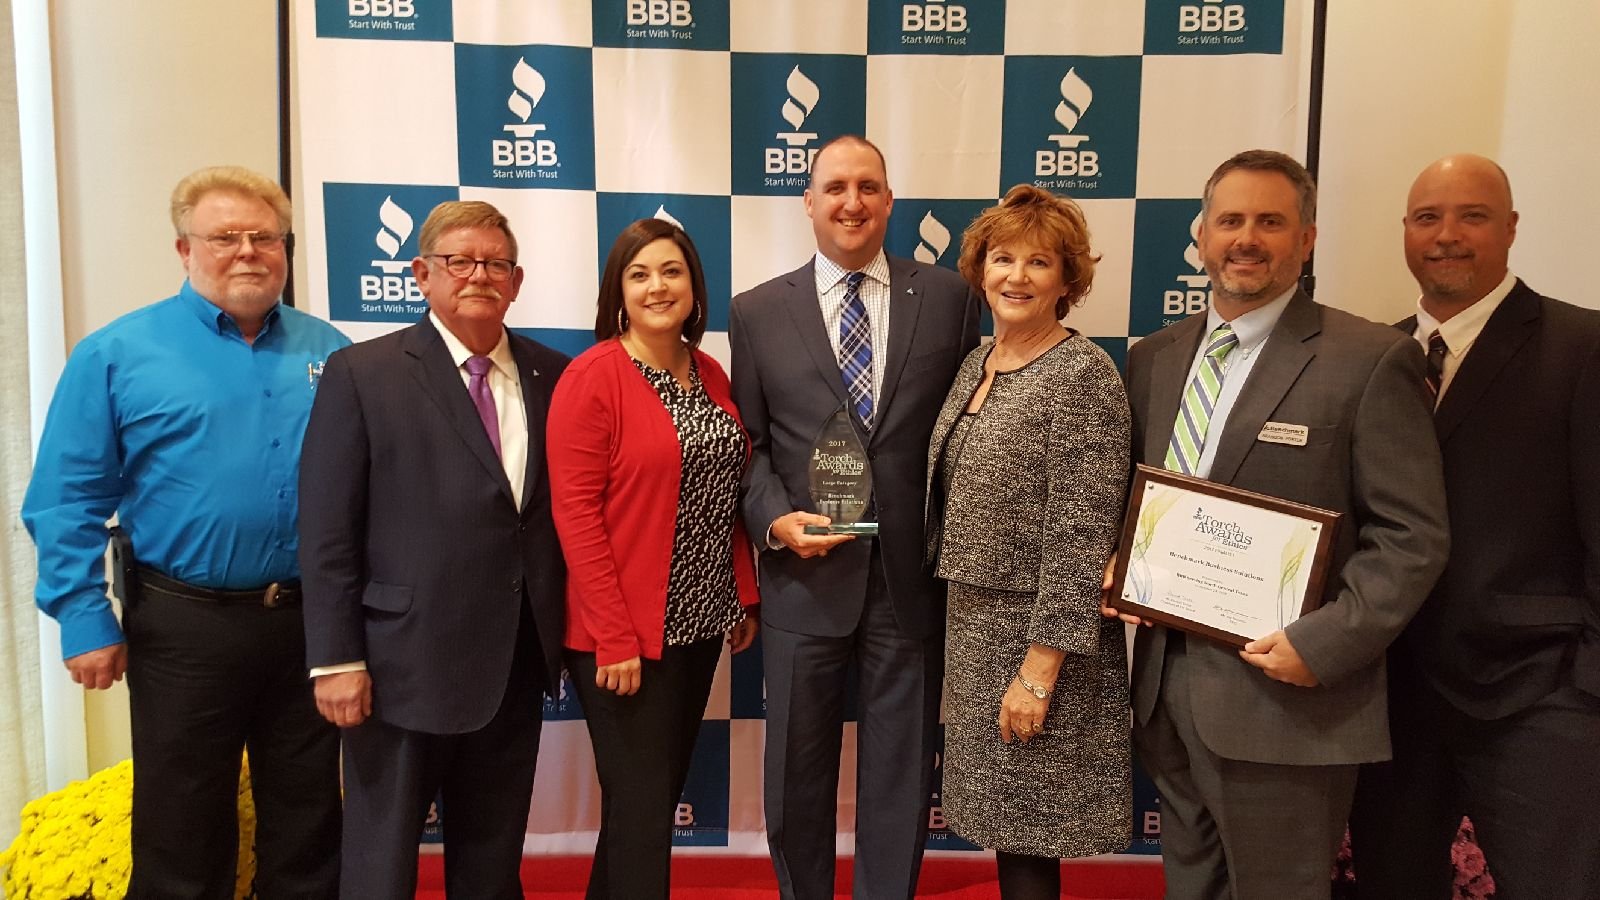 On October 24, 2017, the Better Business Bureau of North Central Texas announced Benchmark Business Solutions as the large category winner of the 2017 Torch Award for Ethics.